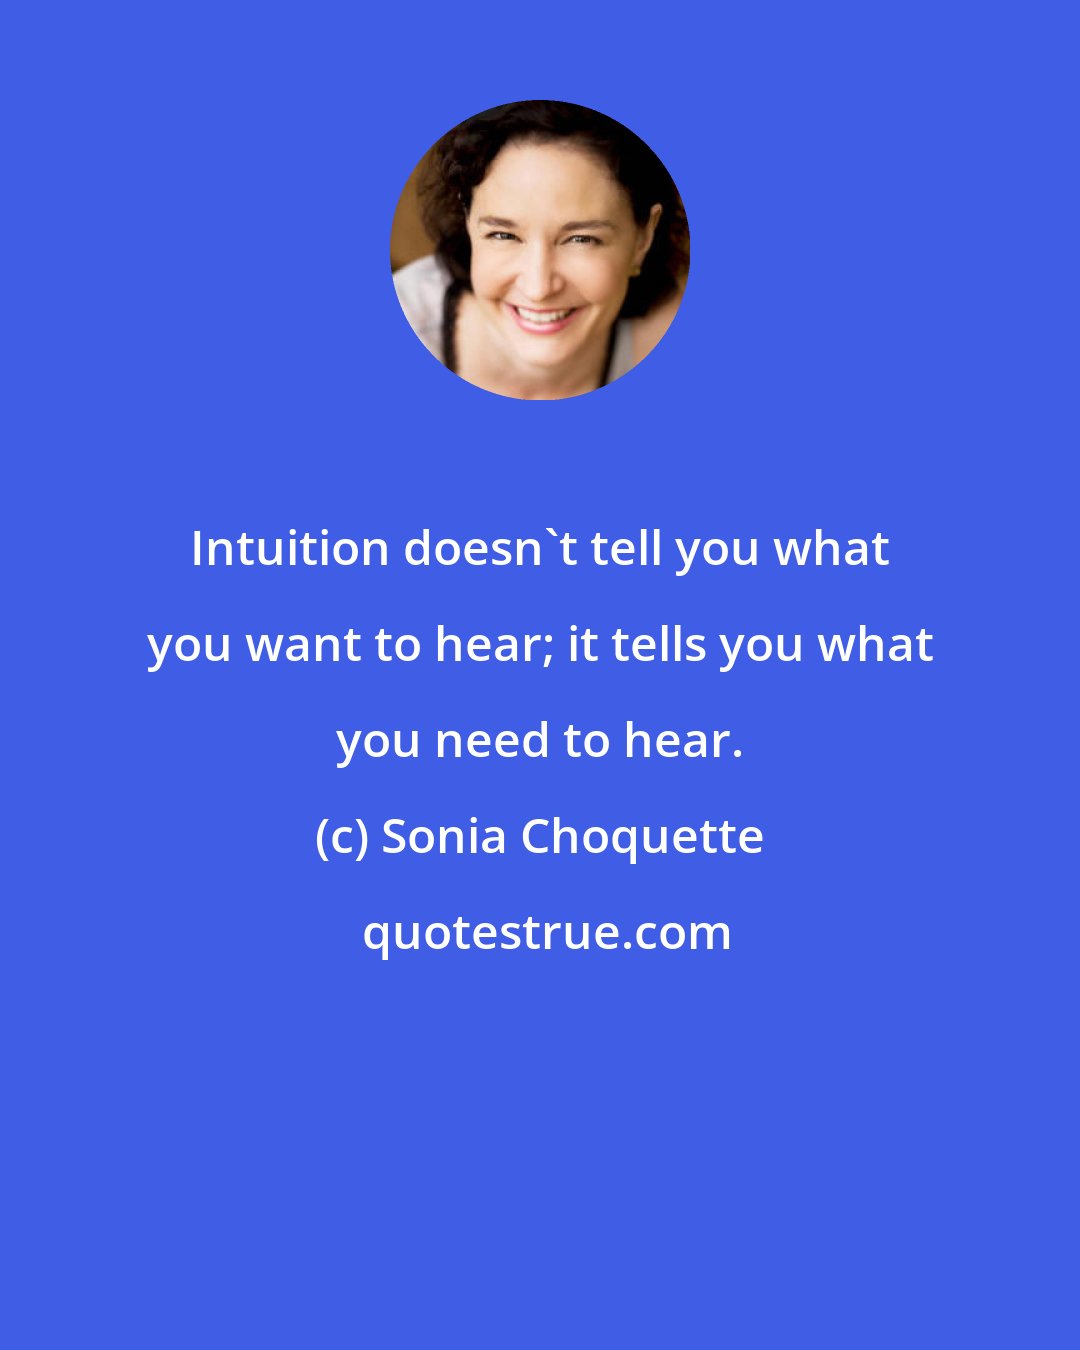 Sonia Choquette: Intuition doesn't tell you what you want to hear; it tells you what you need to hear.